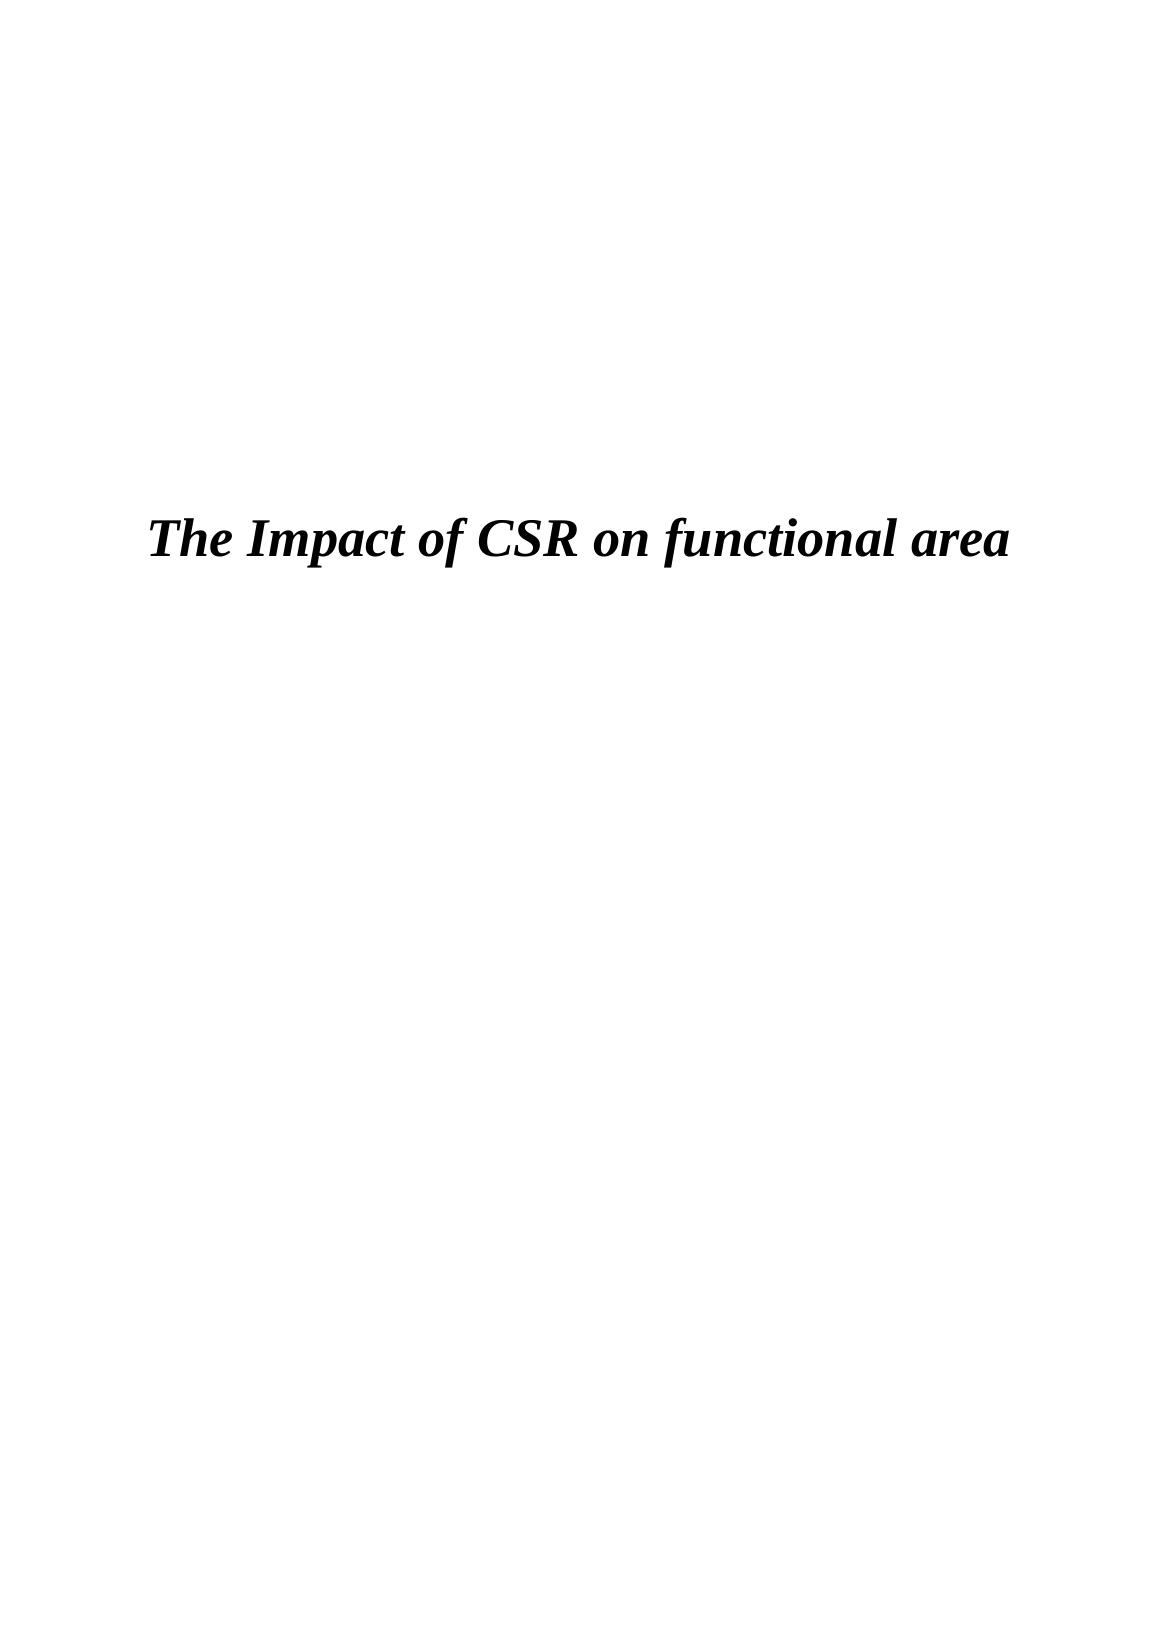 The Impact of CSR on functional area_1